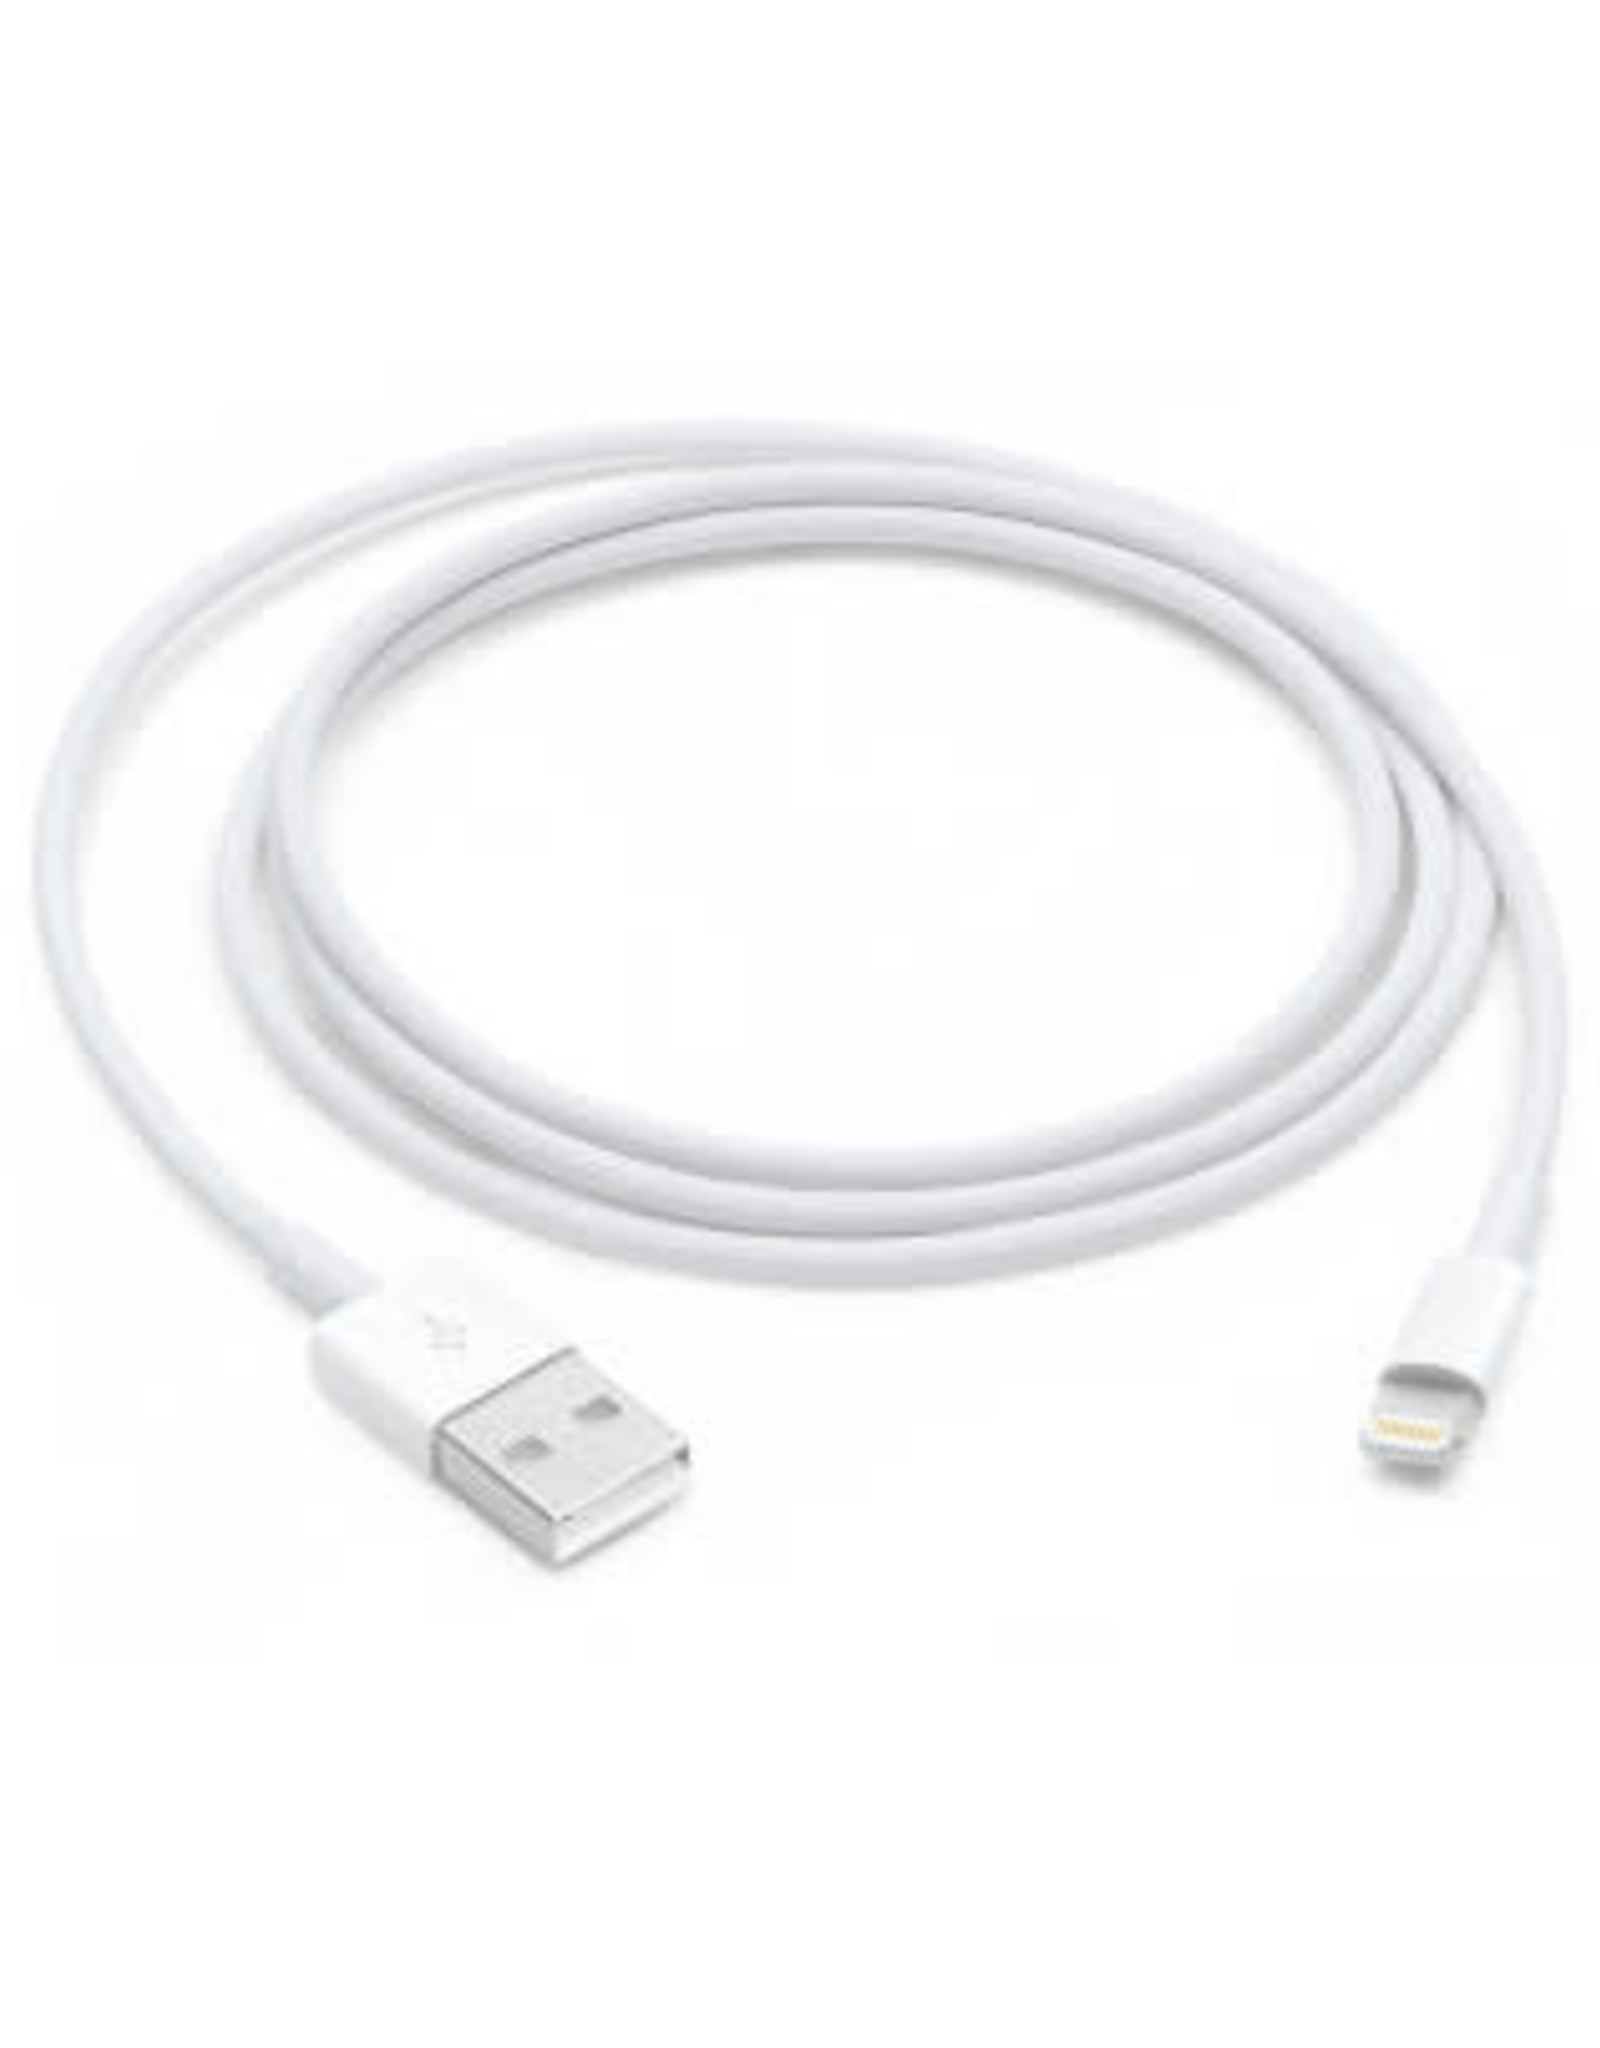 Apple Apple Lightning to USB Cable (1 m)